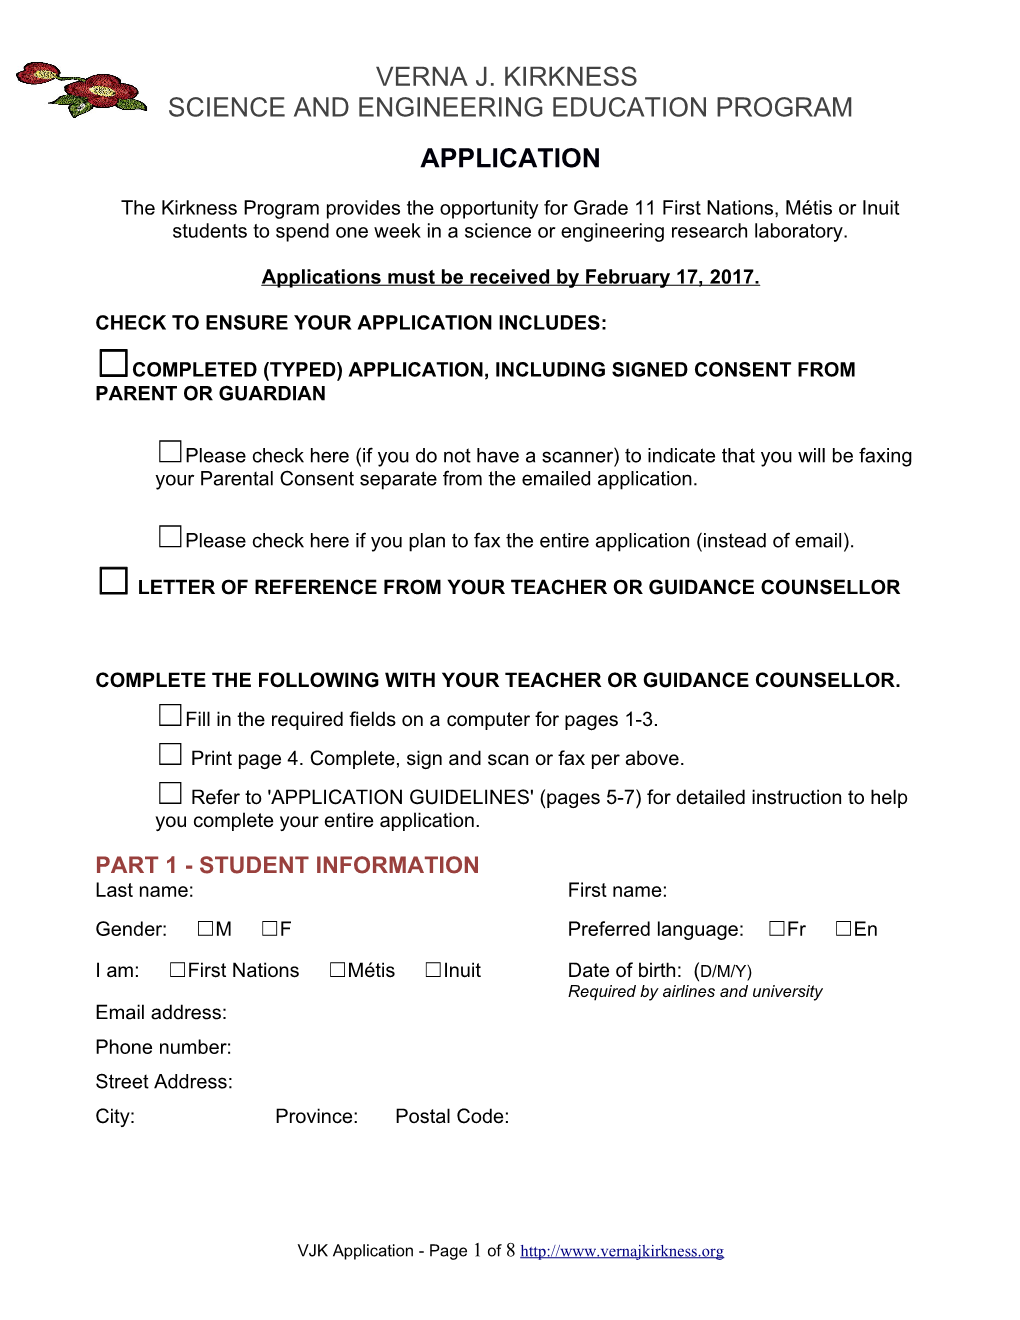 Check to Ensure Your Application Includes